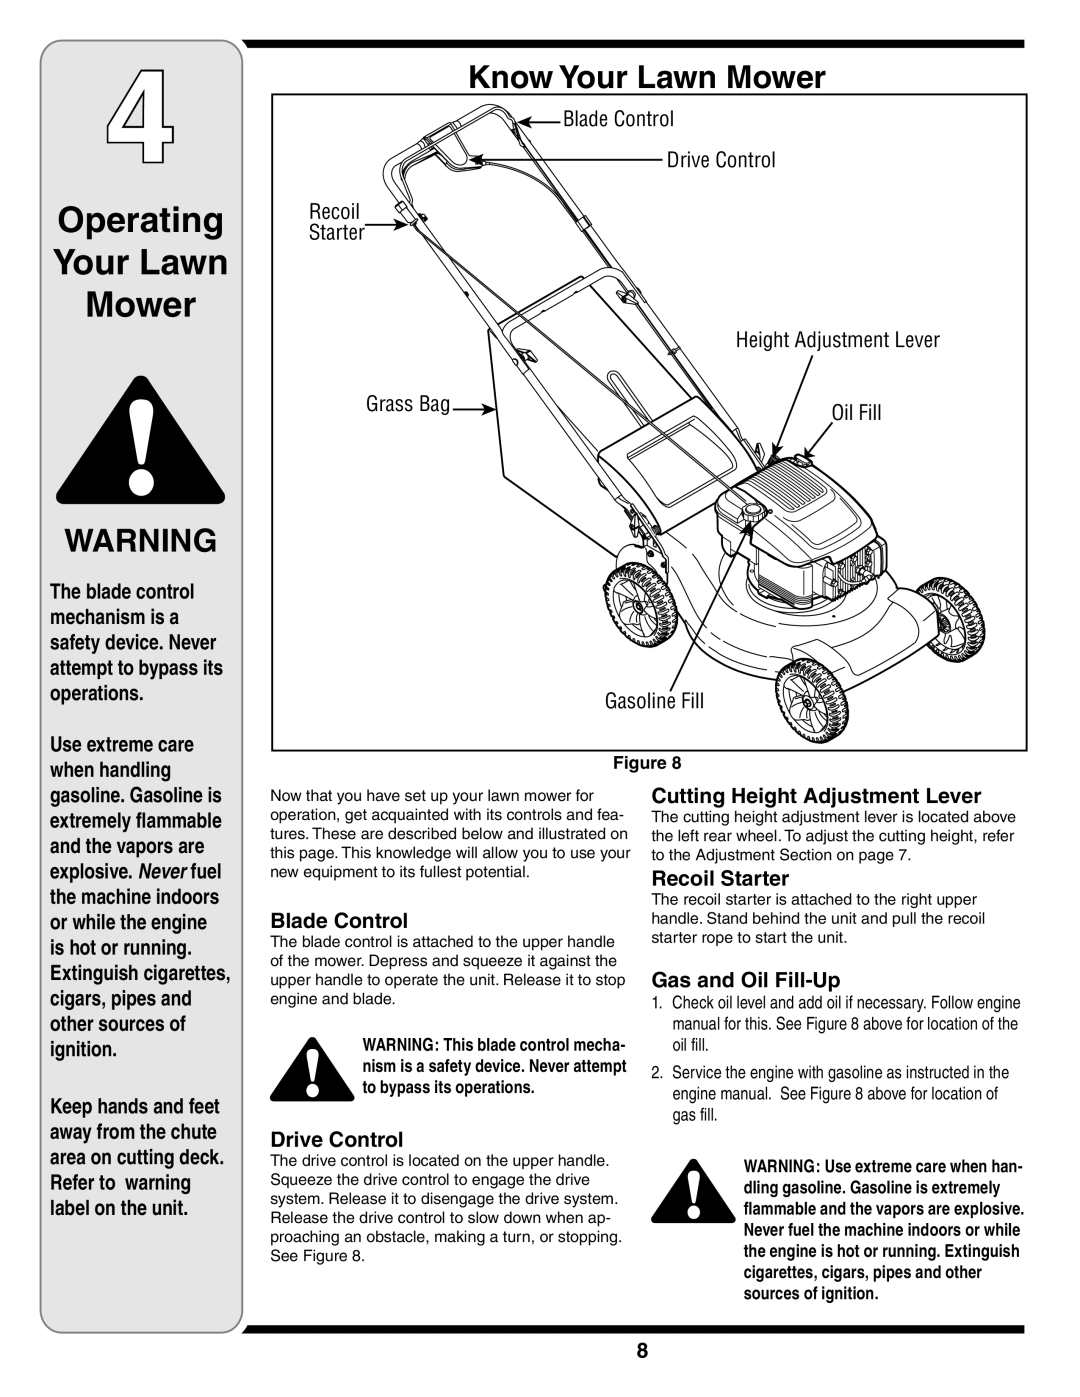 Yard-Man 829 Operating Your Lawn Mower, Know Your Lawn Mower, Blade Control, Drive Control, Recoil, Starter, Grass Bag 